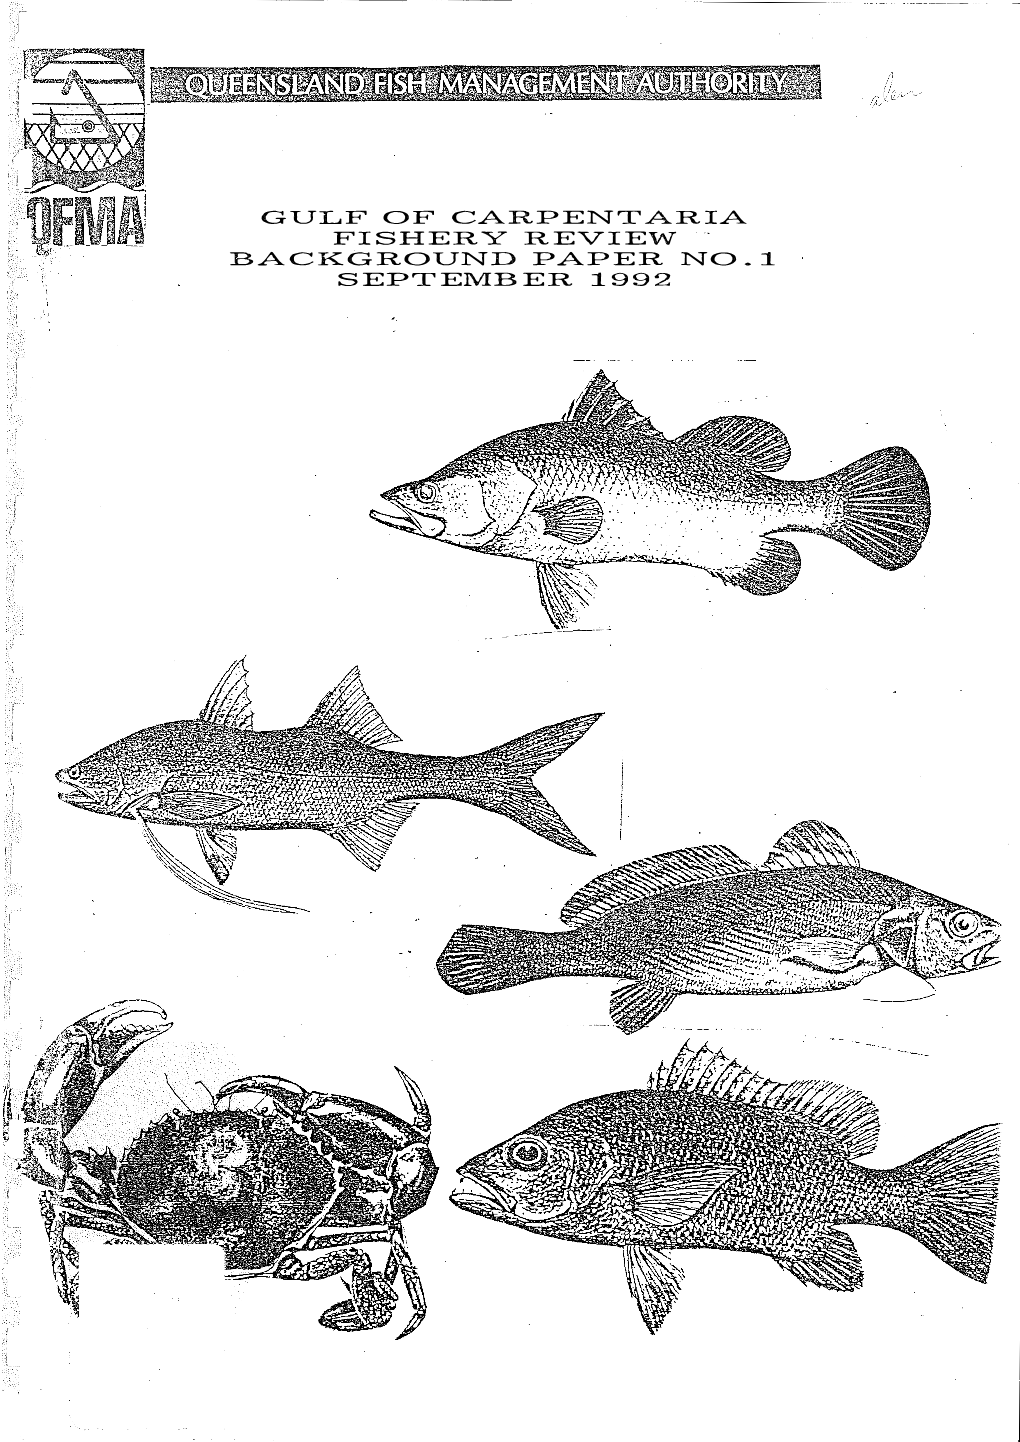 Gulf of Carpentaria Fishery Review Back Ground Paper No. 1